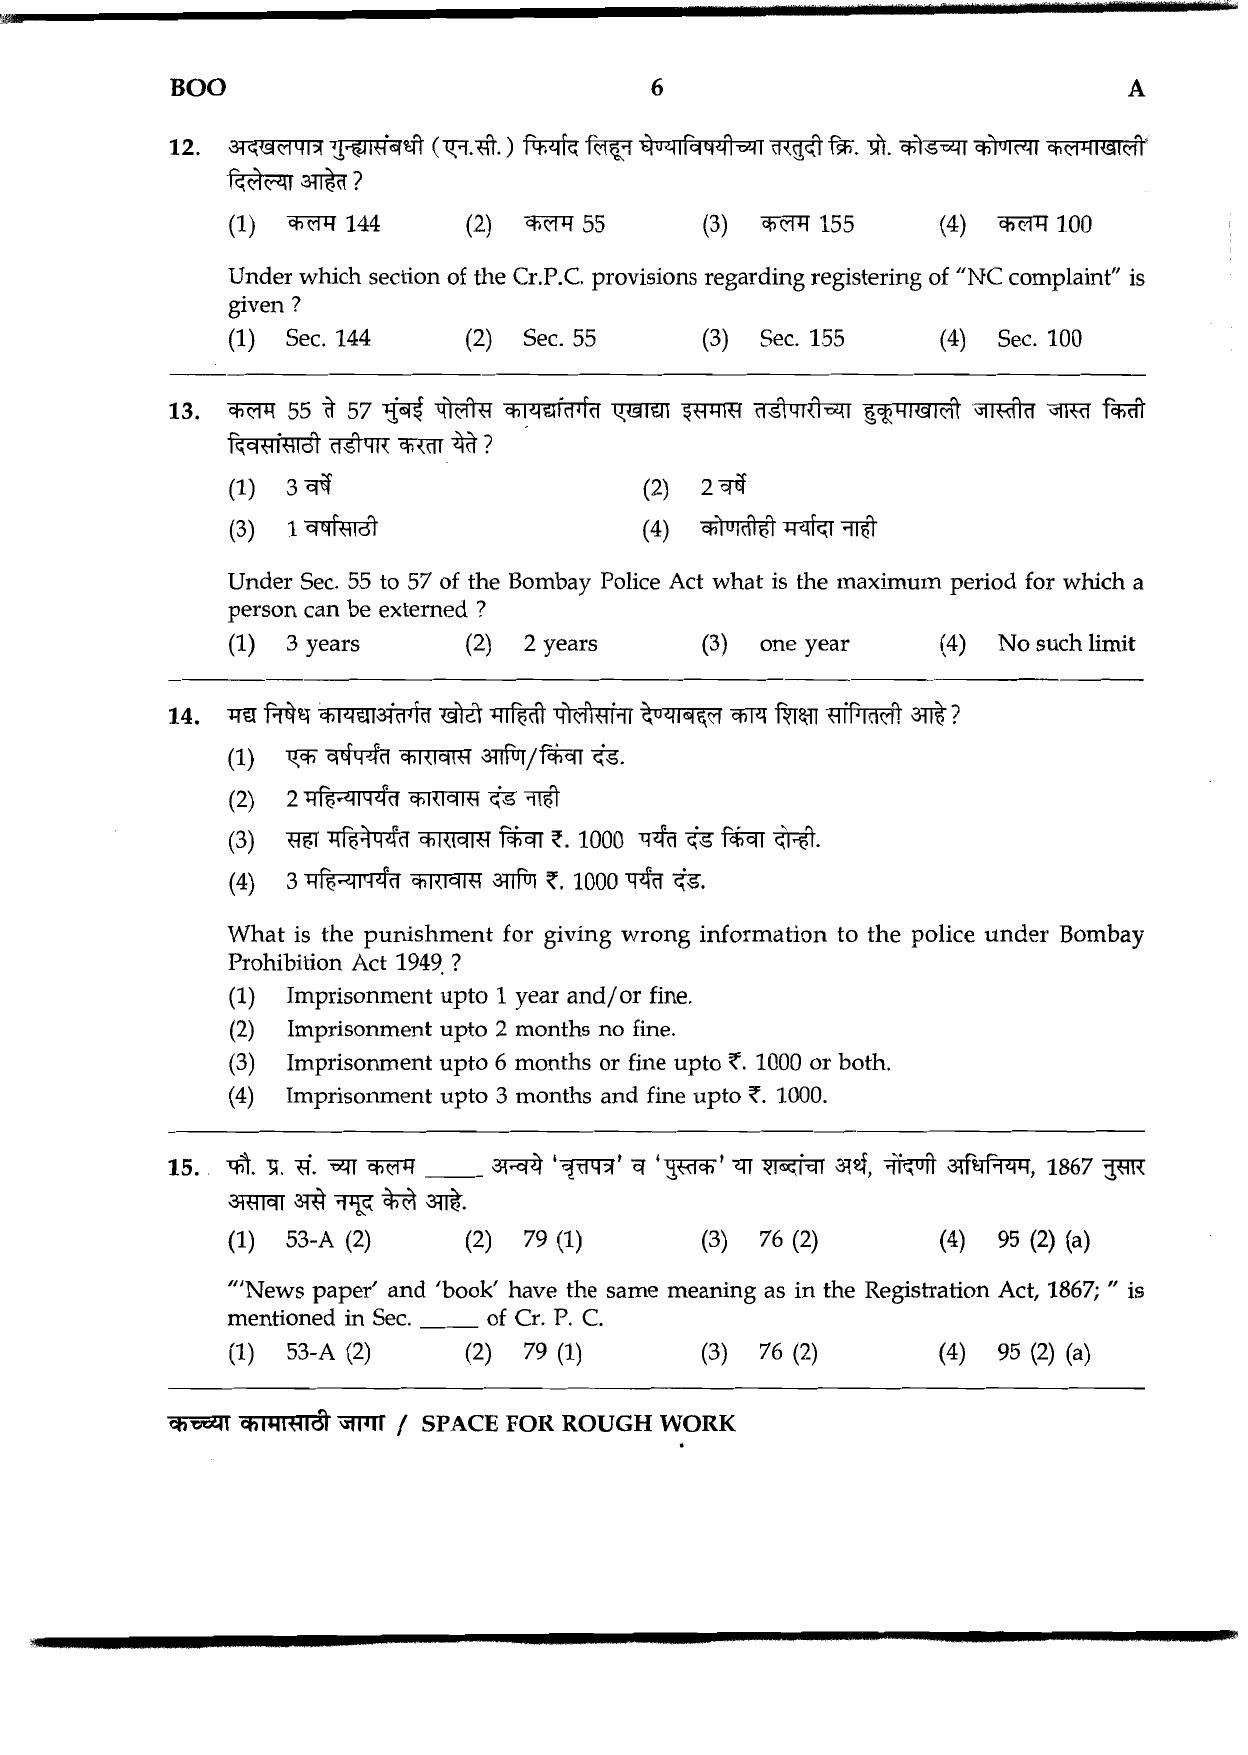 Assam Police LDA, UDA & Other Posts General Knowledge Sample papers - Page 6